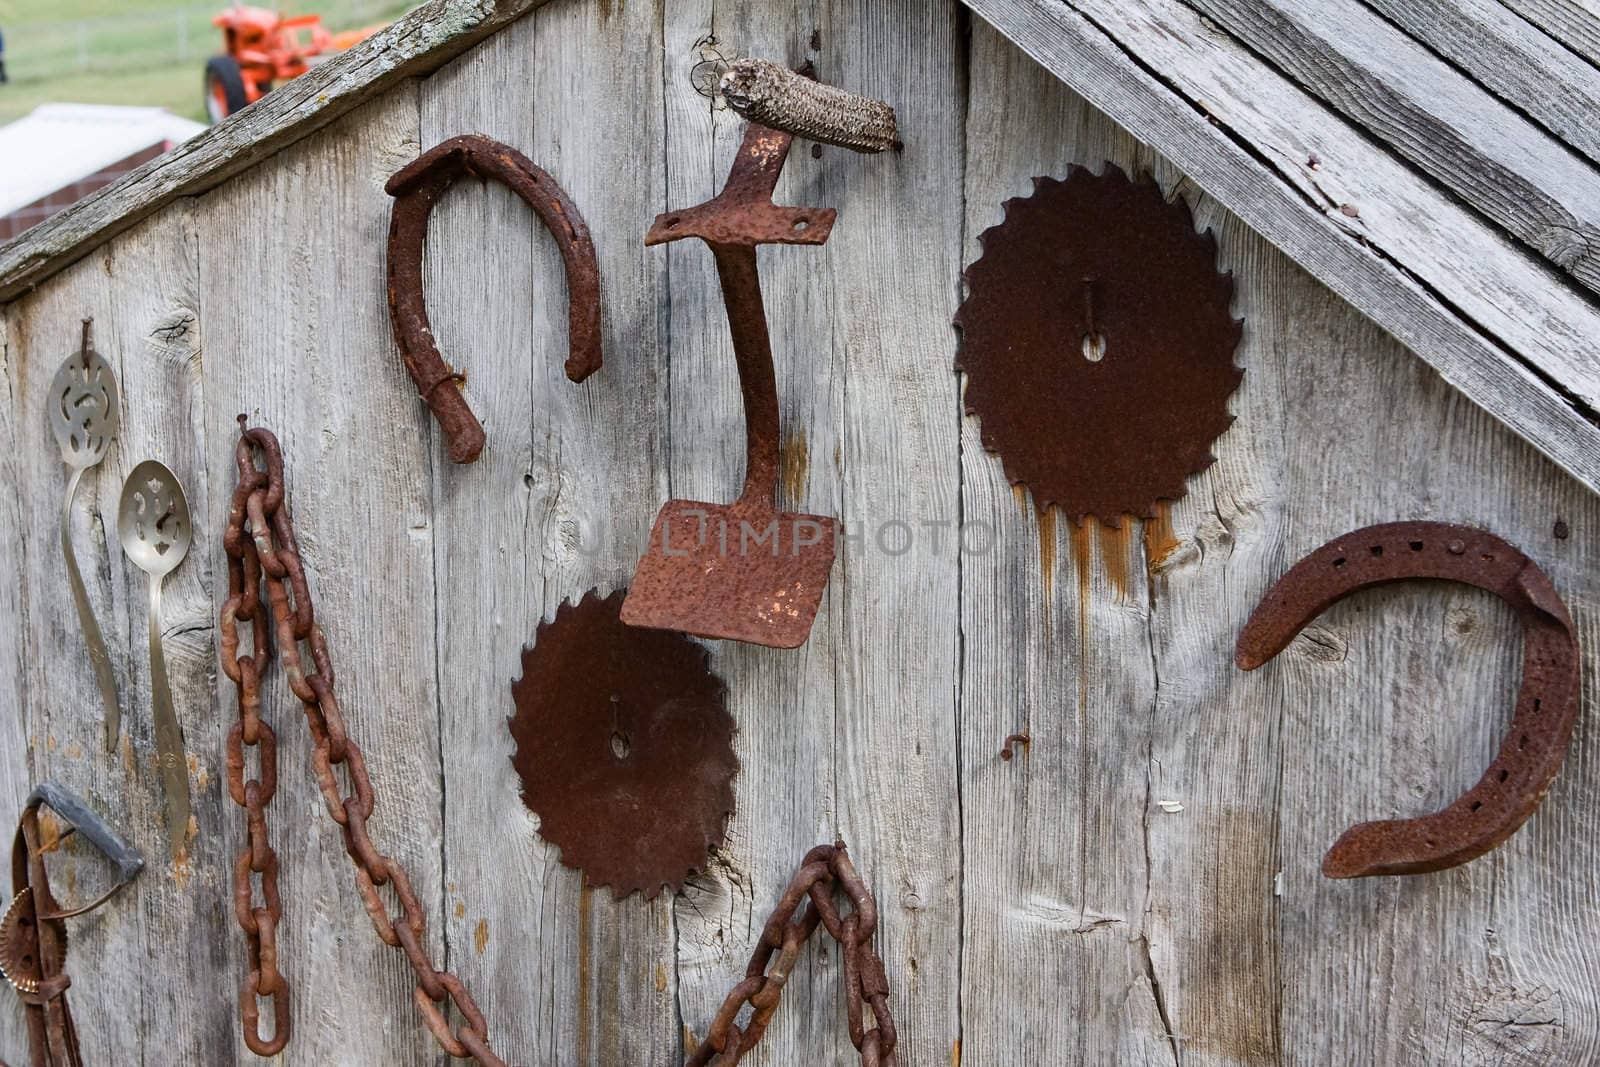 Antique farm tools on a shed wall by Coffee999